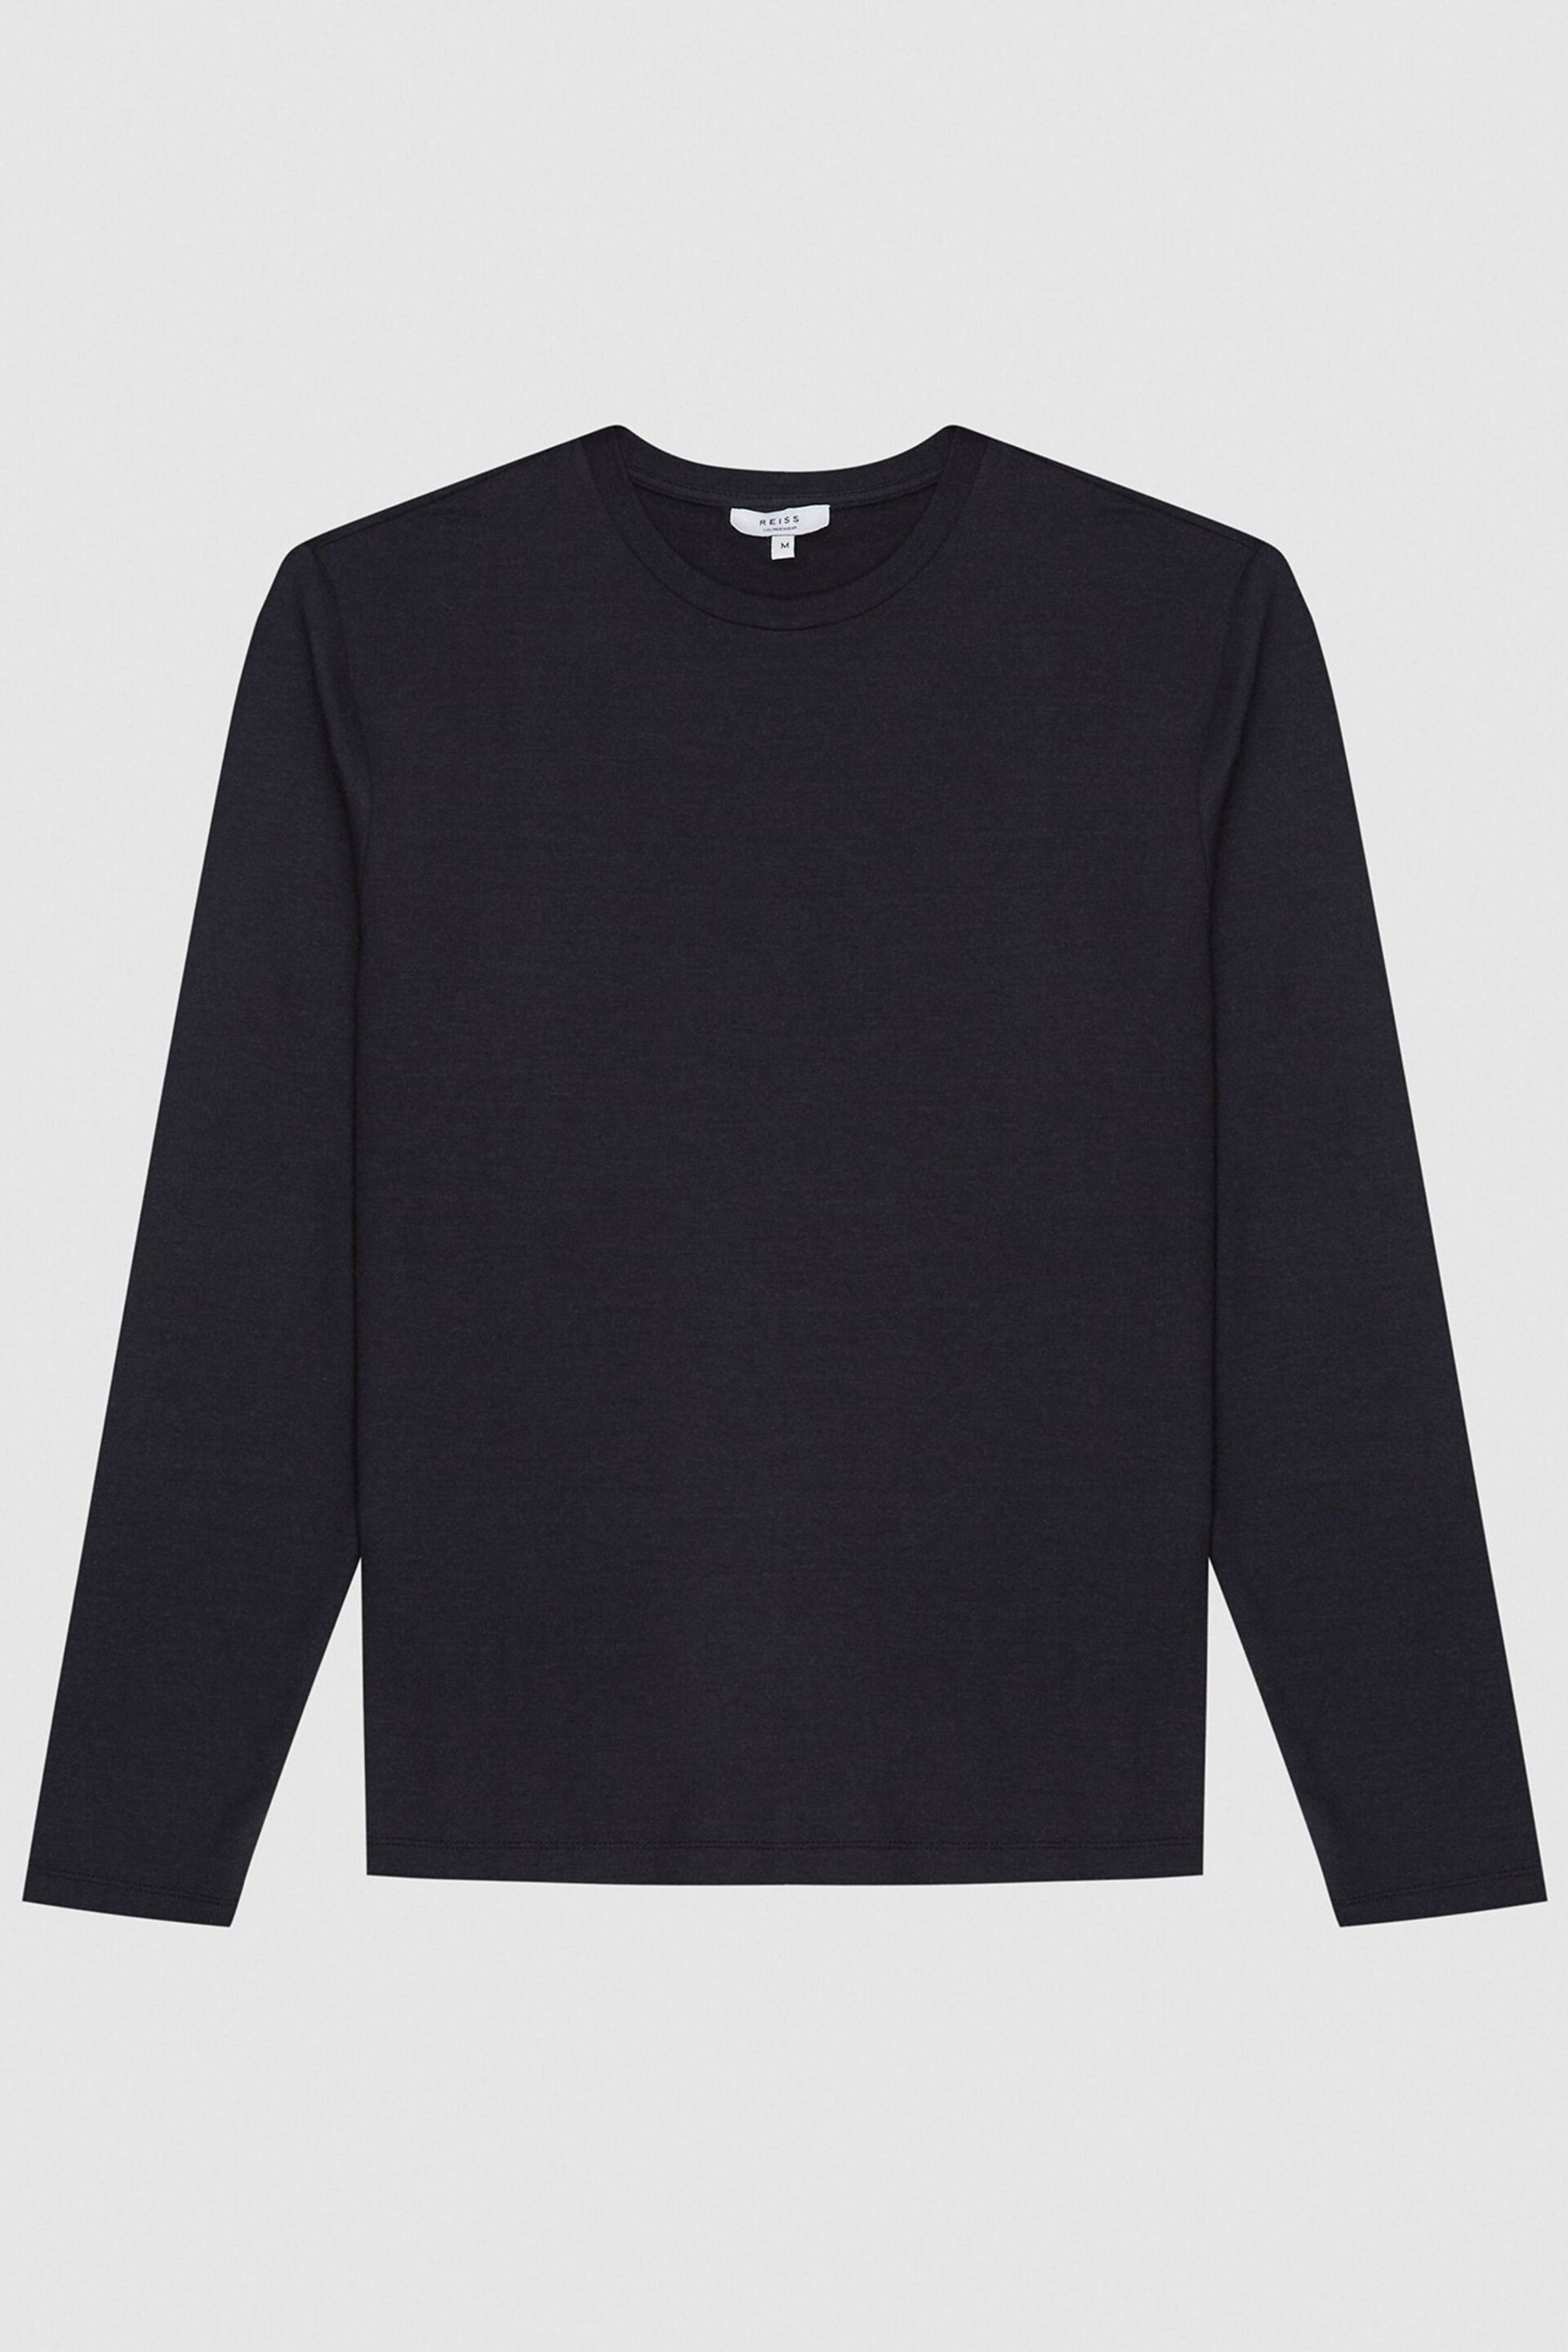 Reiss Grey Armstrong Crew Neck Jersey Top - Image 2 of 5